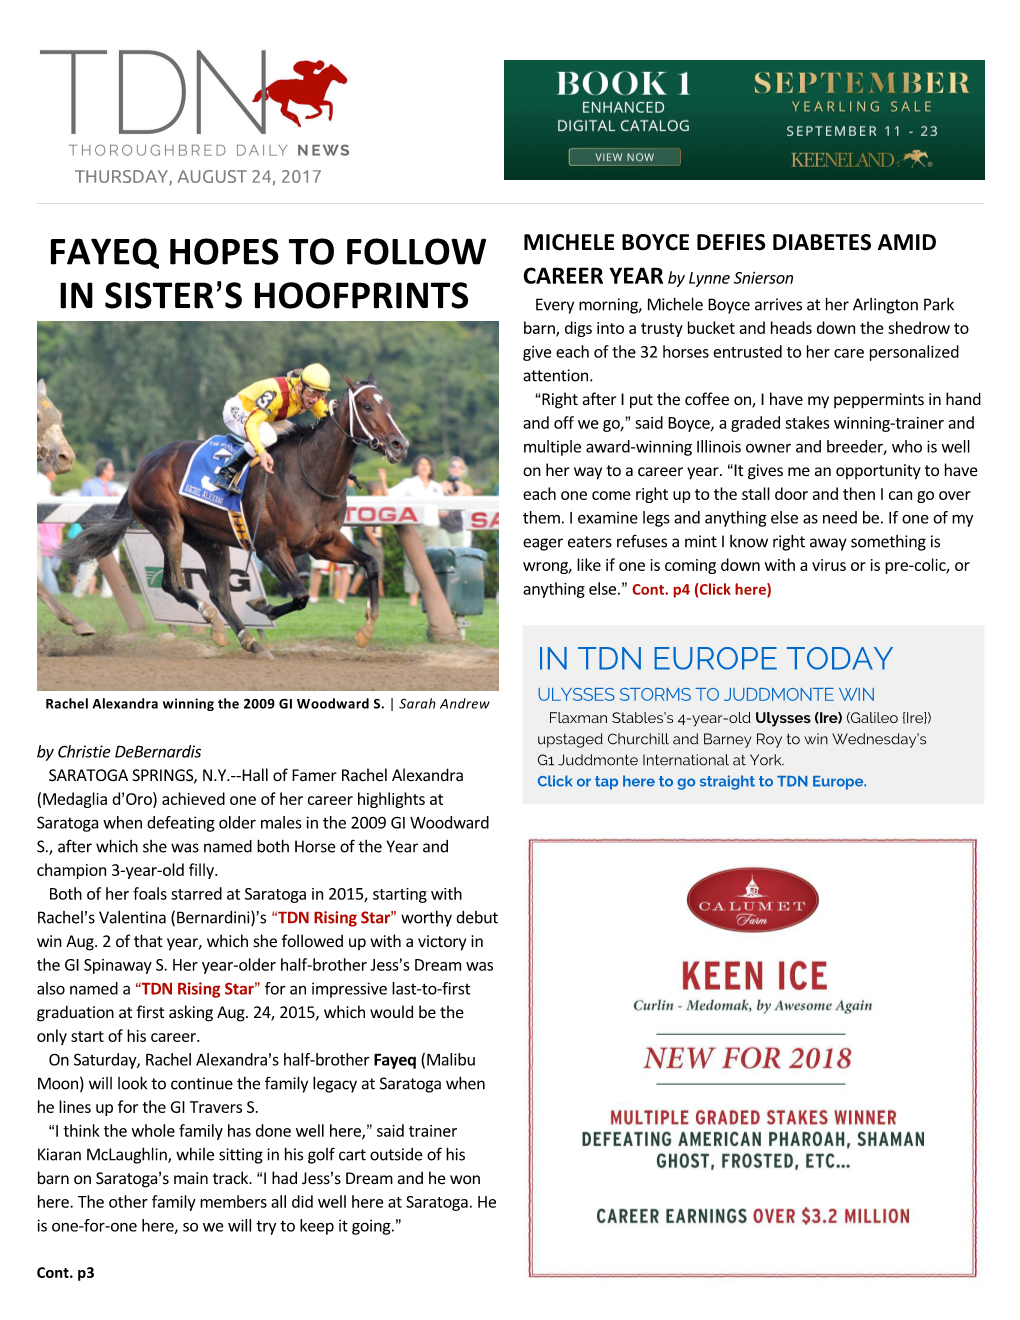 Fayeq Hopes to Follow in Sister=S Hoofprints